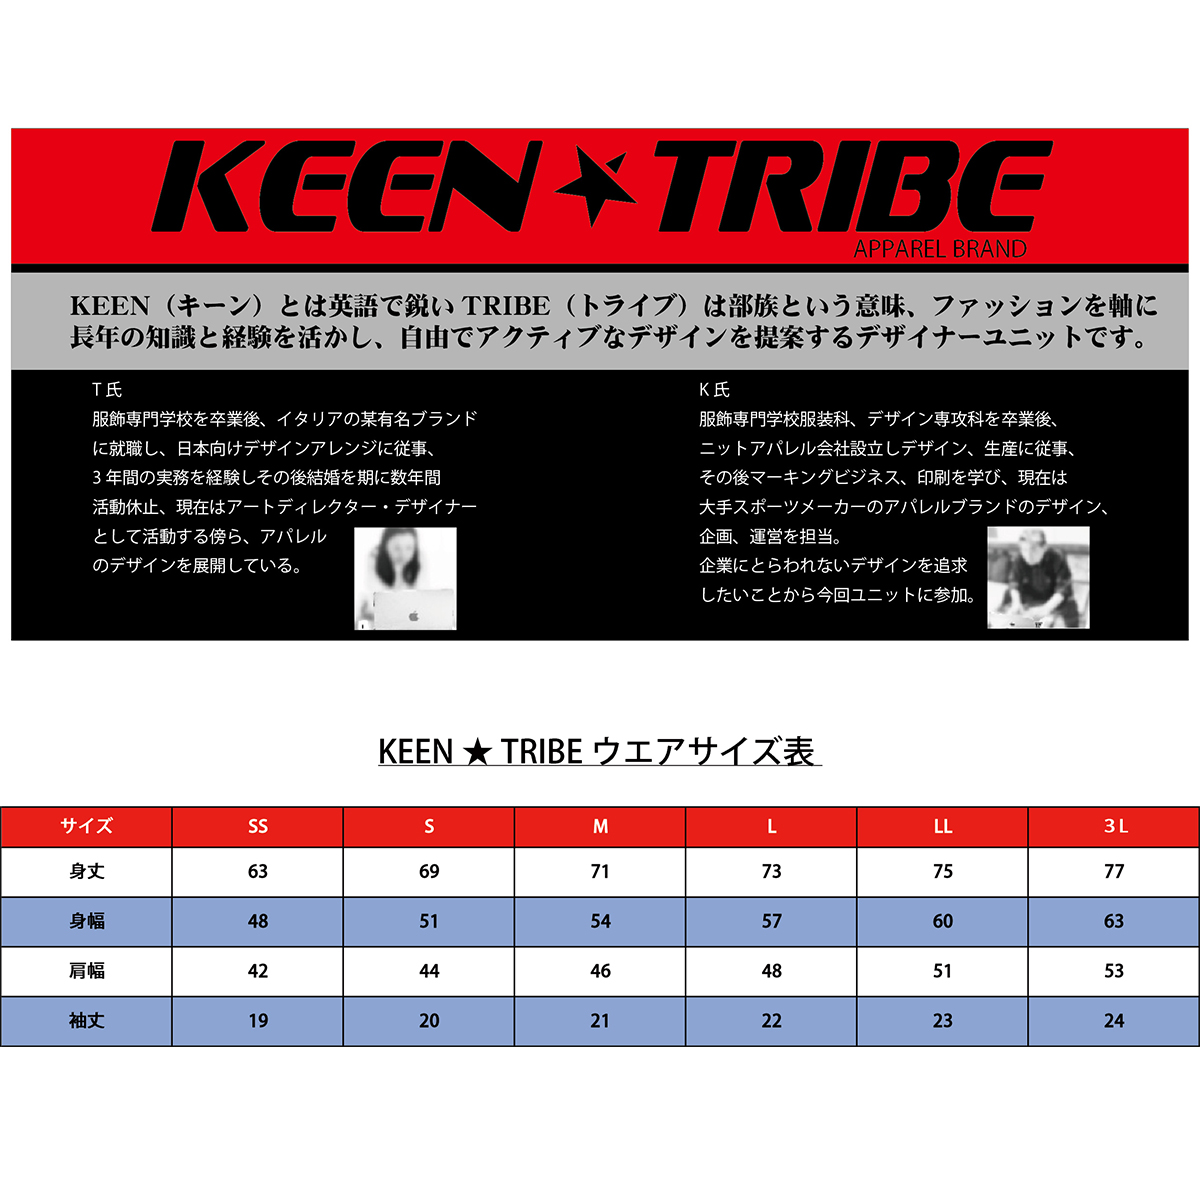 KEEN ★ TRIBE　KT-73(受注生産)